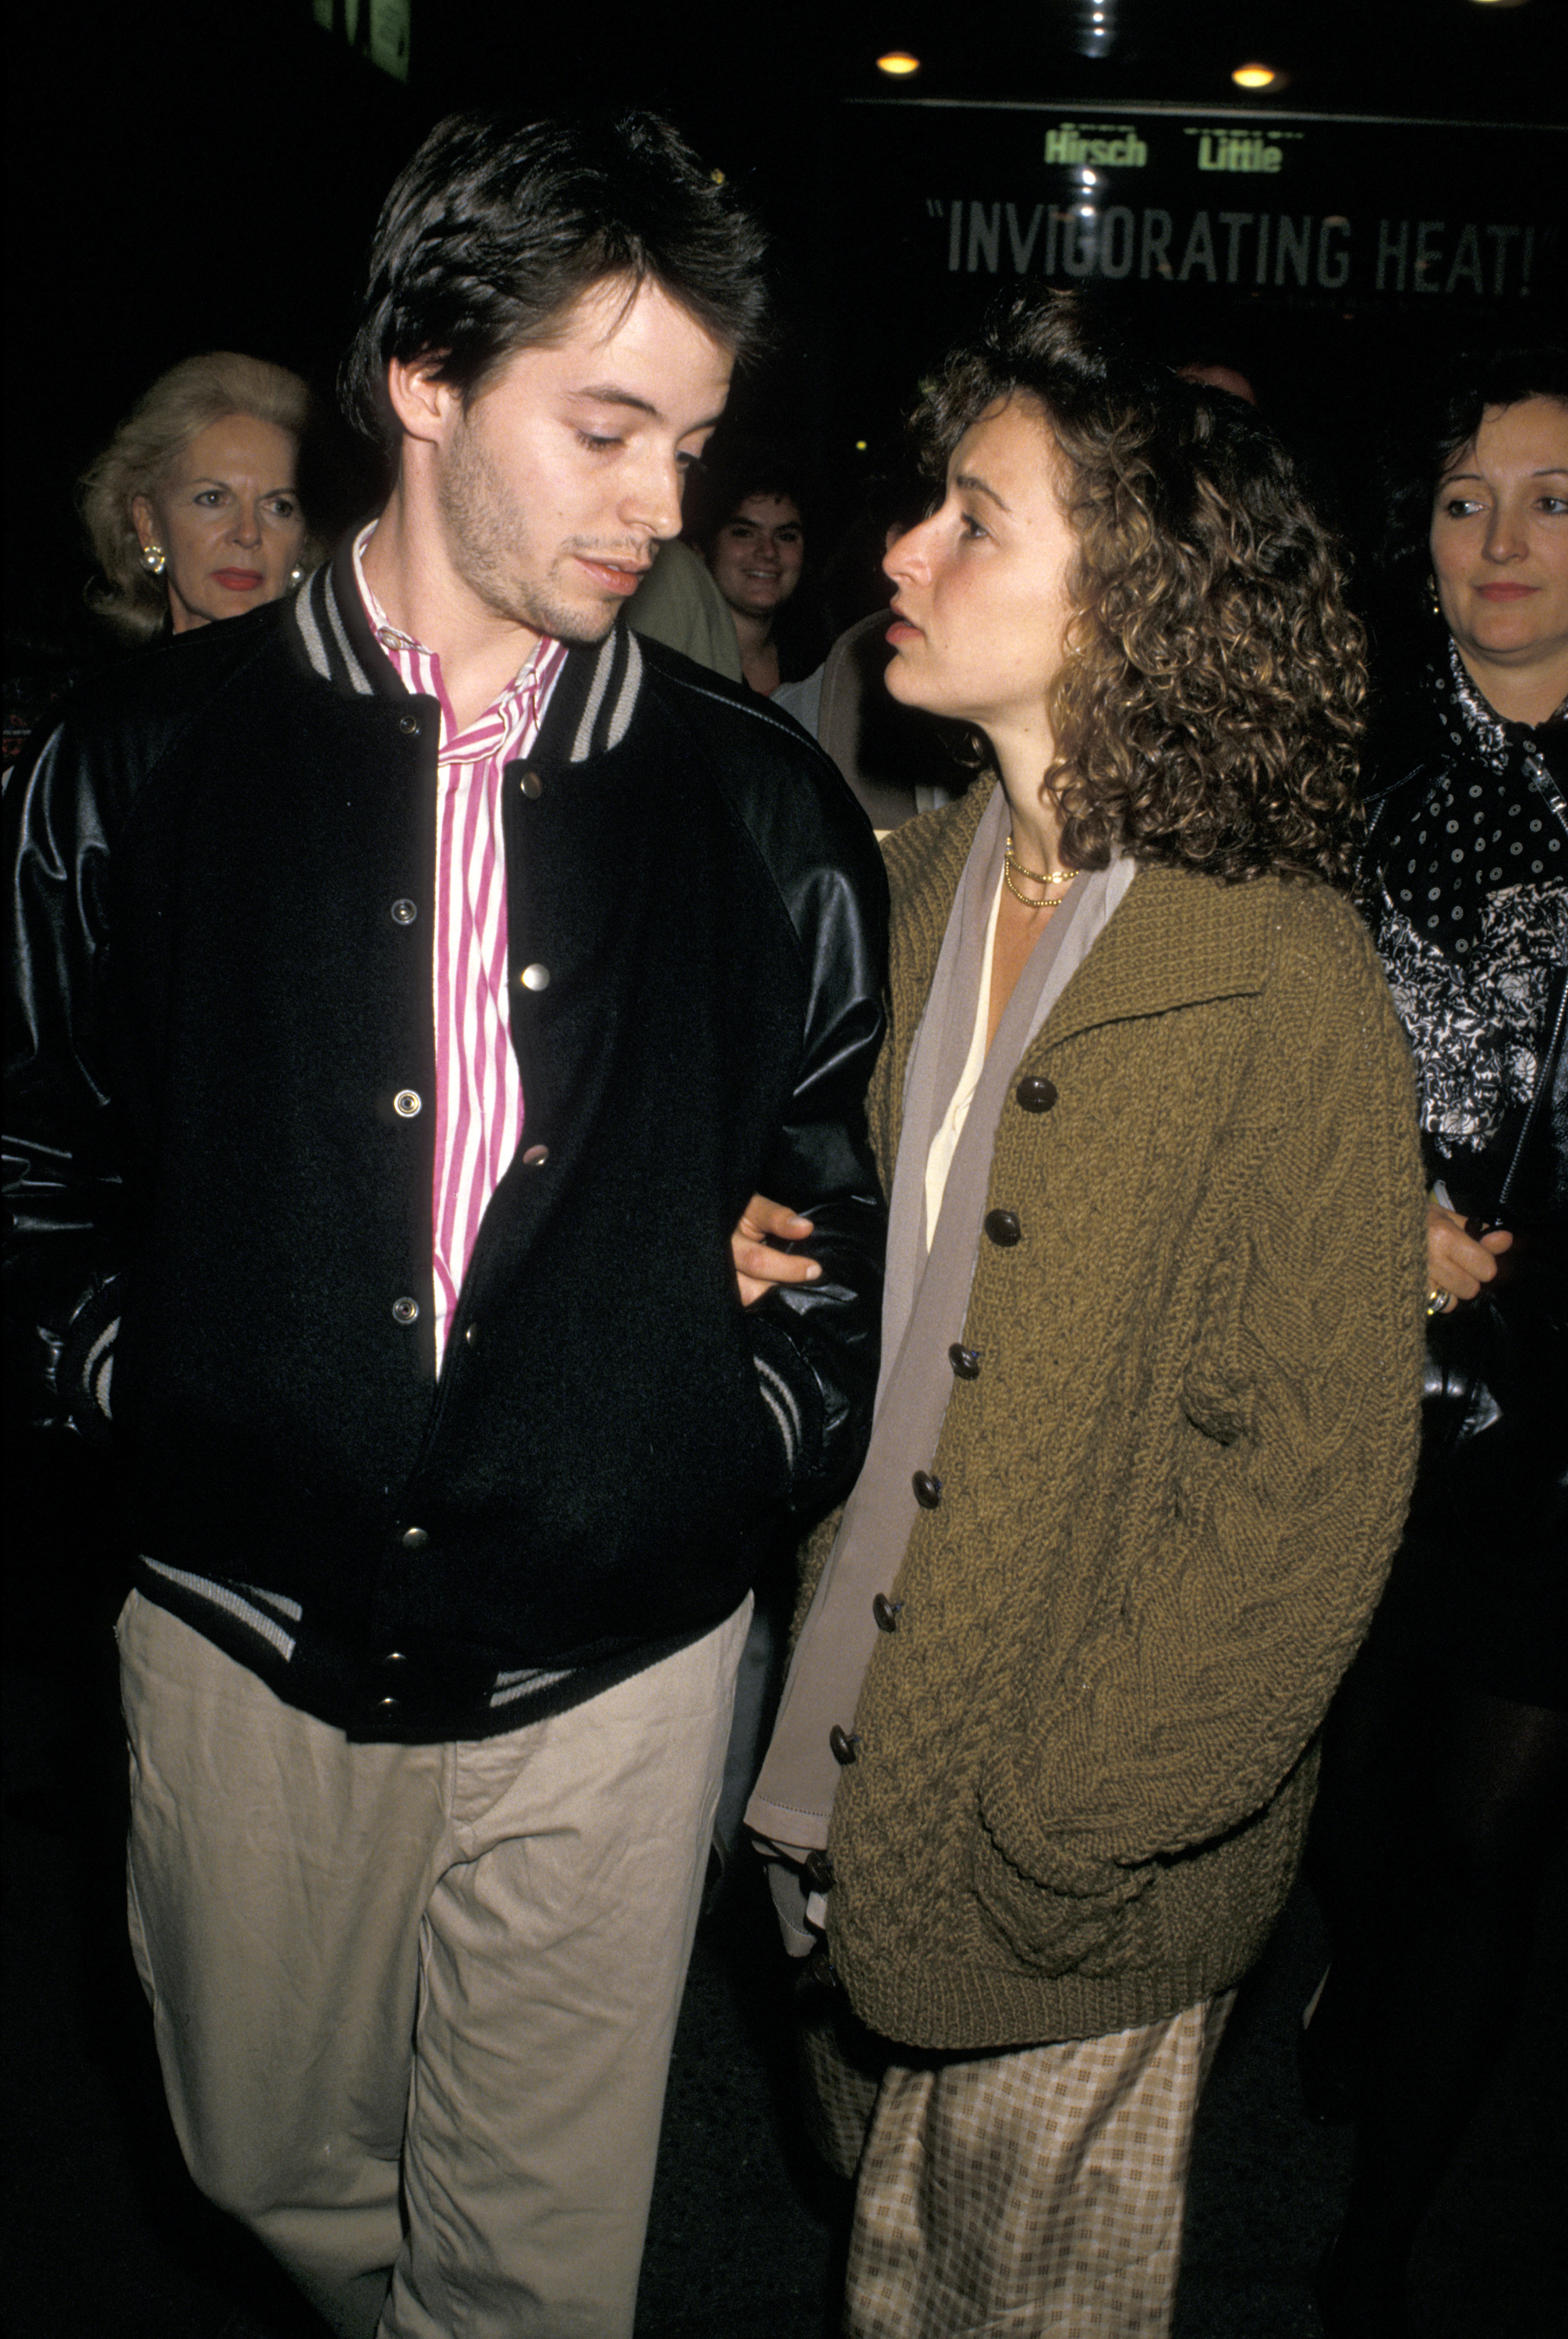 Matthew Broderick and Jennifer Grey during "Burn This" premiere at Plymouth Theatre in New York on November 3, 1987. | Source: Getty Images